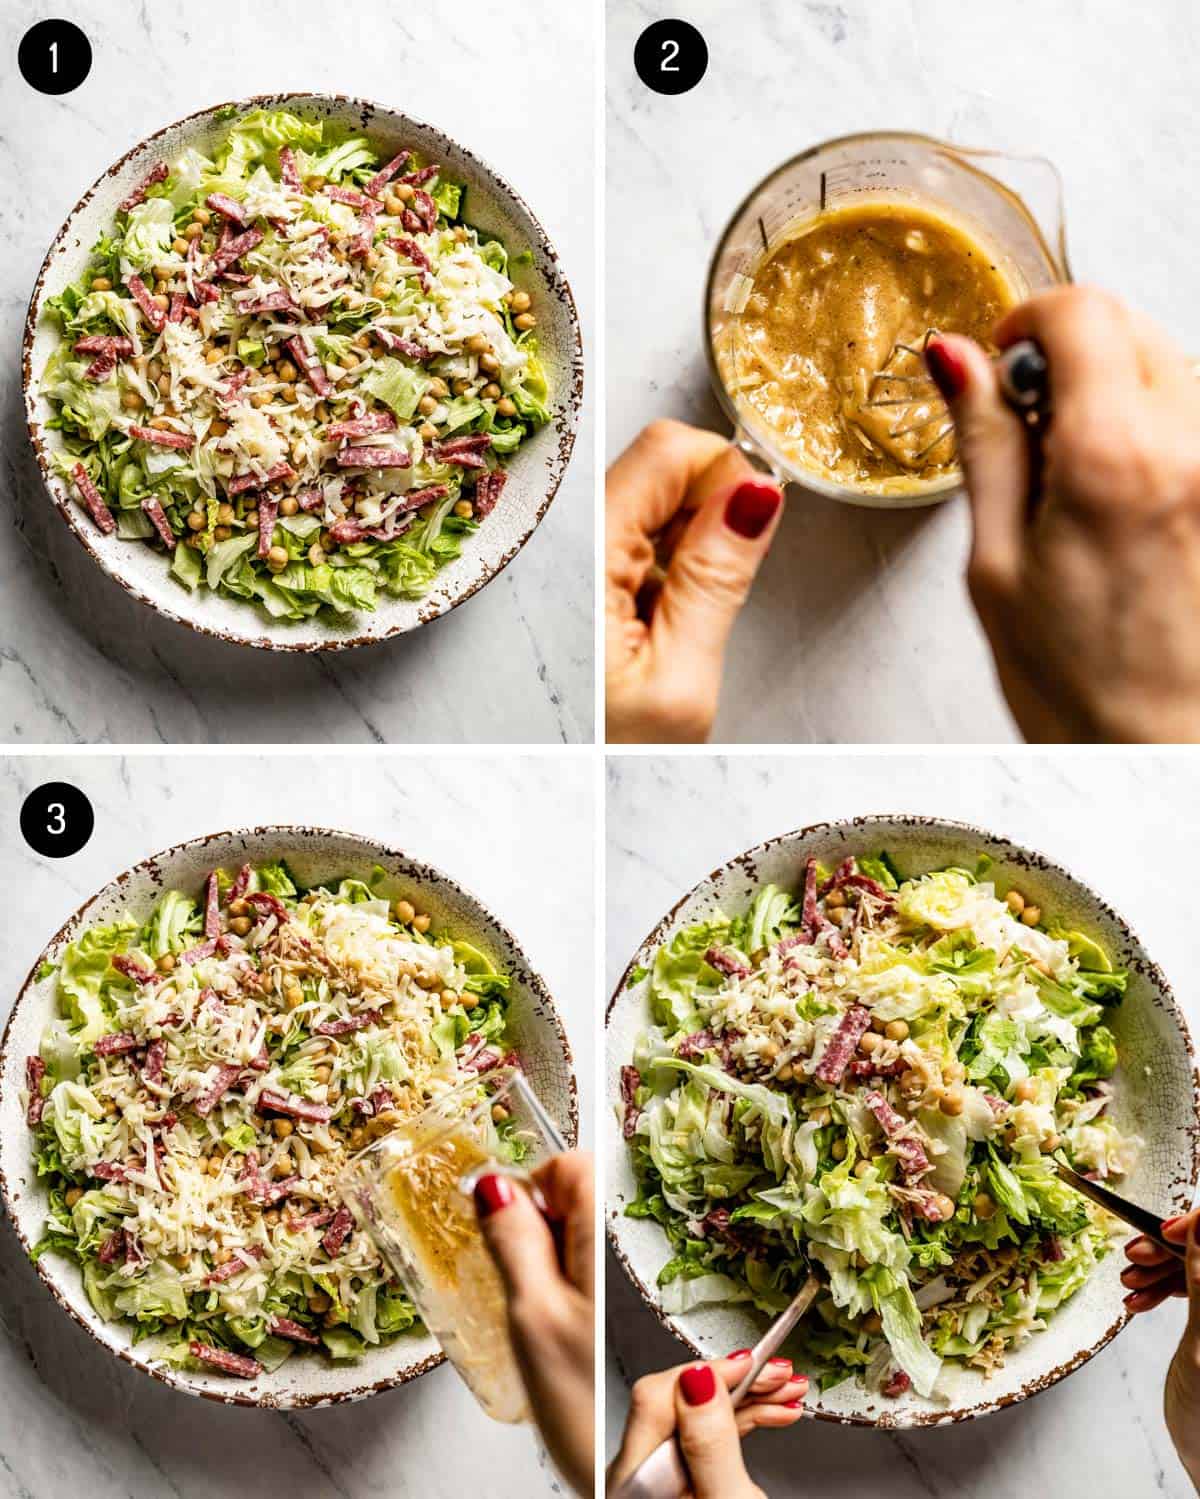 A person showing how to make a salad with homemade dressing from the top view.